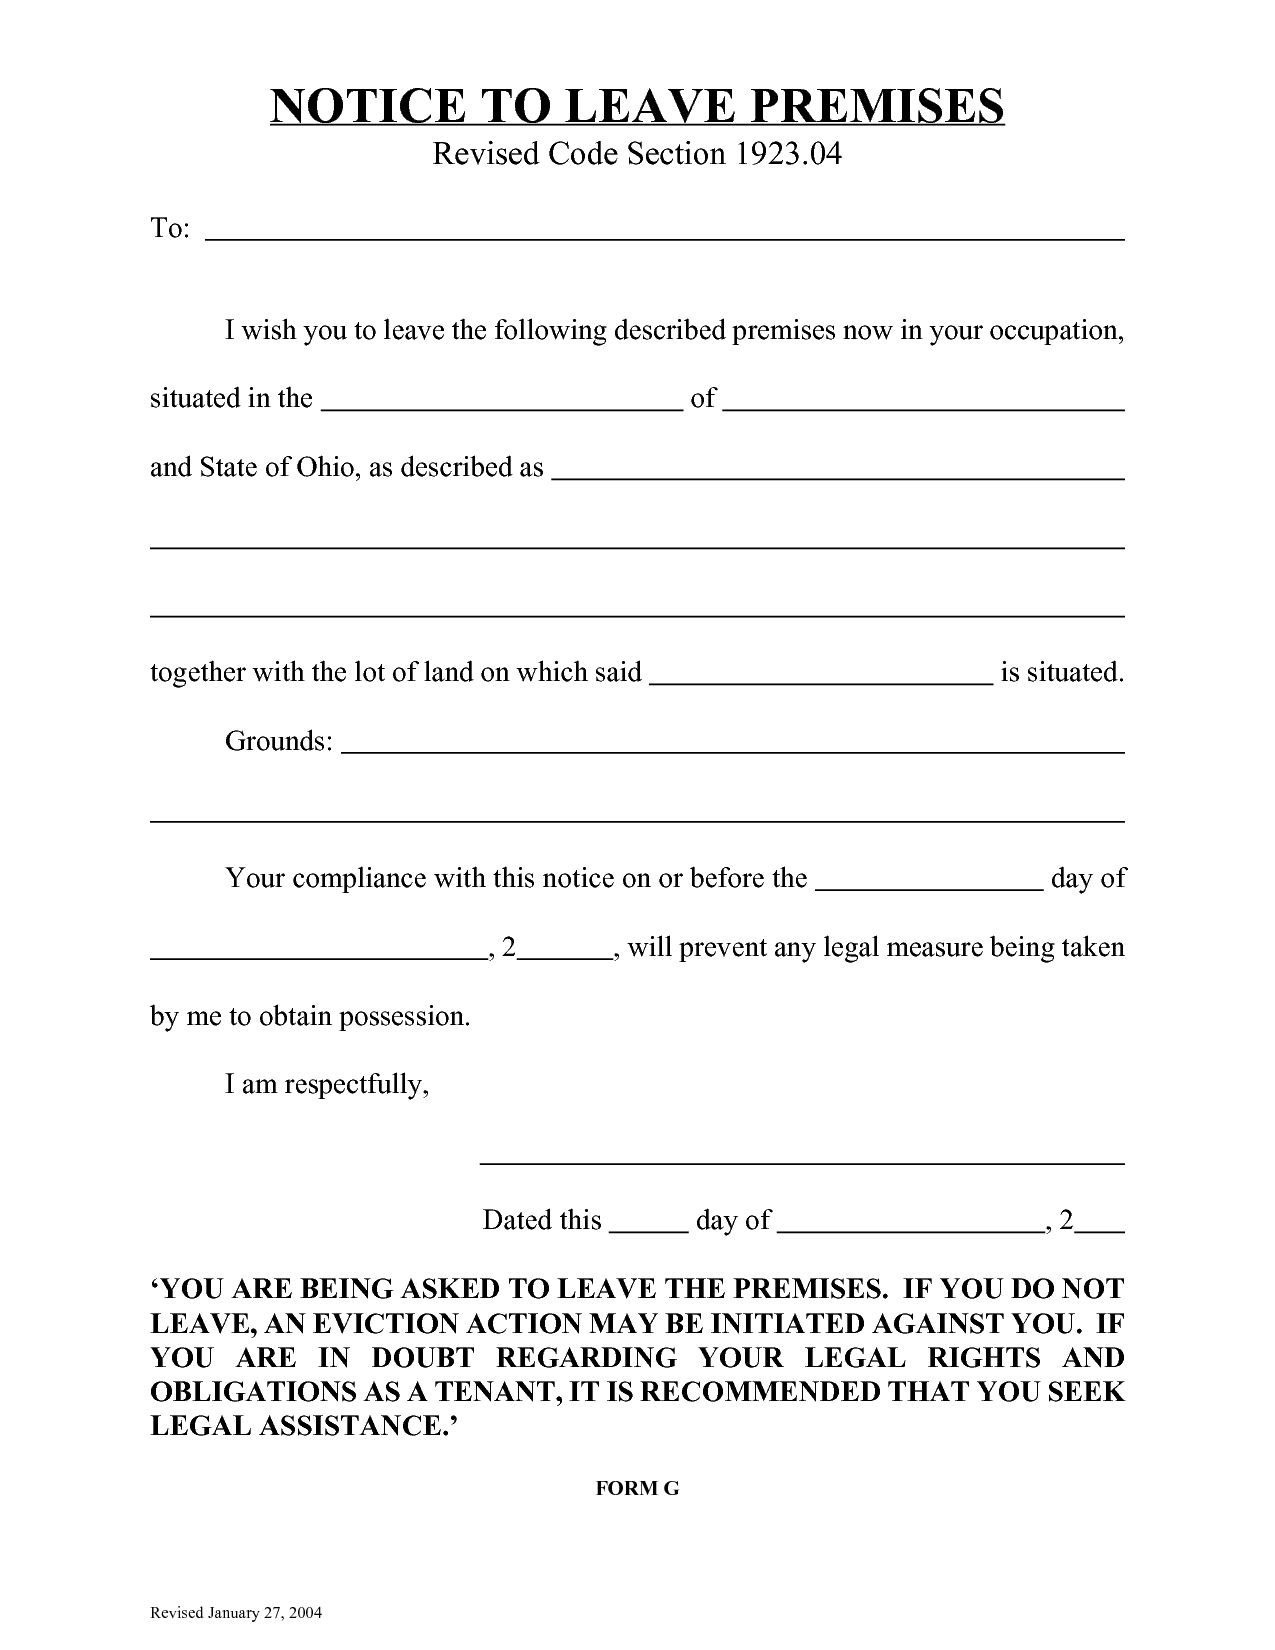 10 Best Images Of Eviction Notice Florida Form Blank Template Via 3 - Free Printable 3 Day Eviction Notice